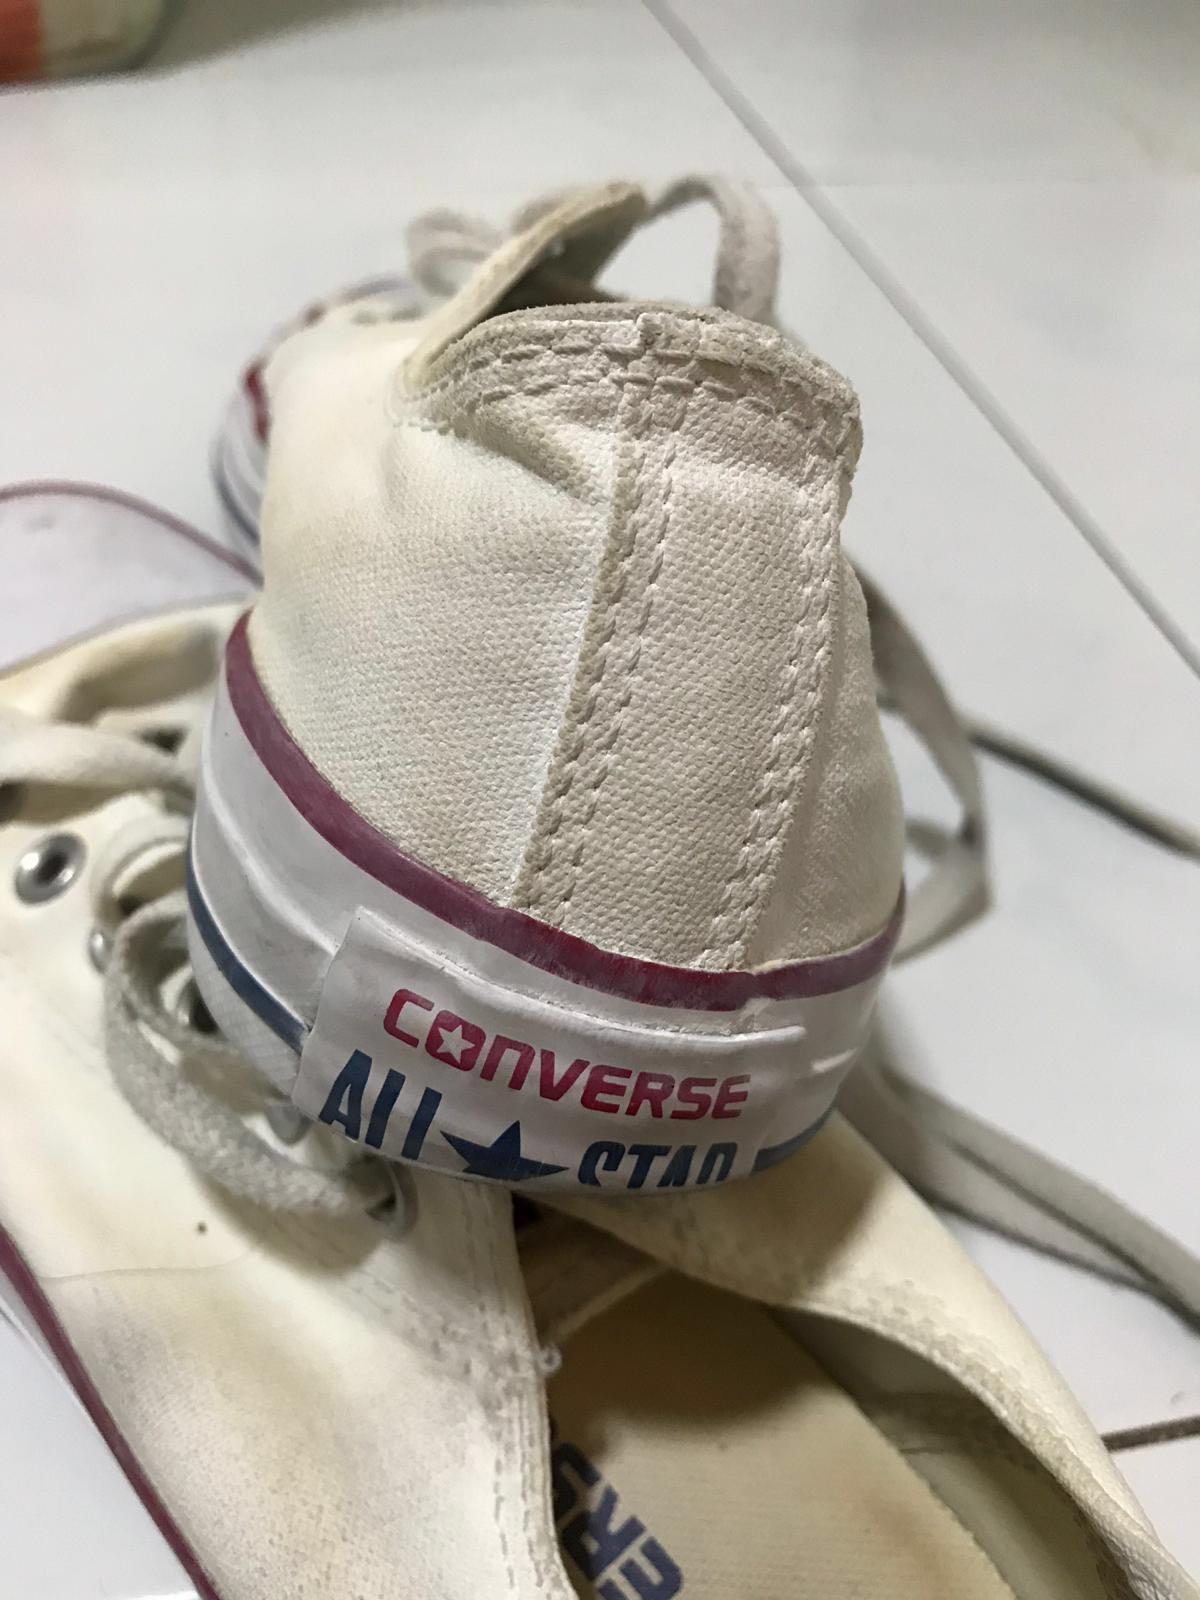 cheapest place for converse